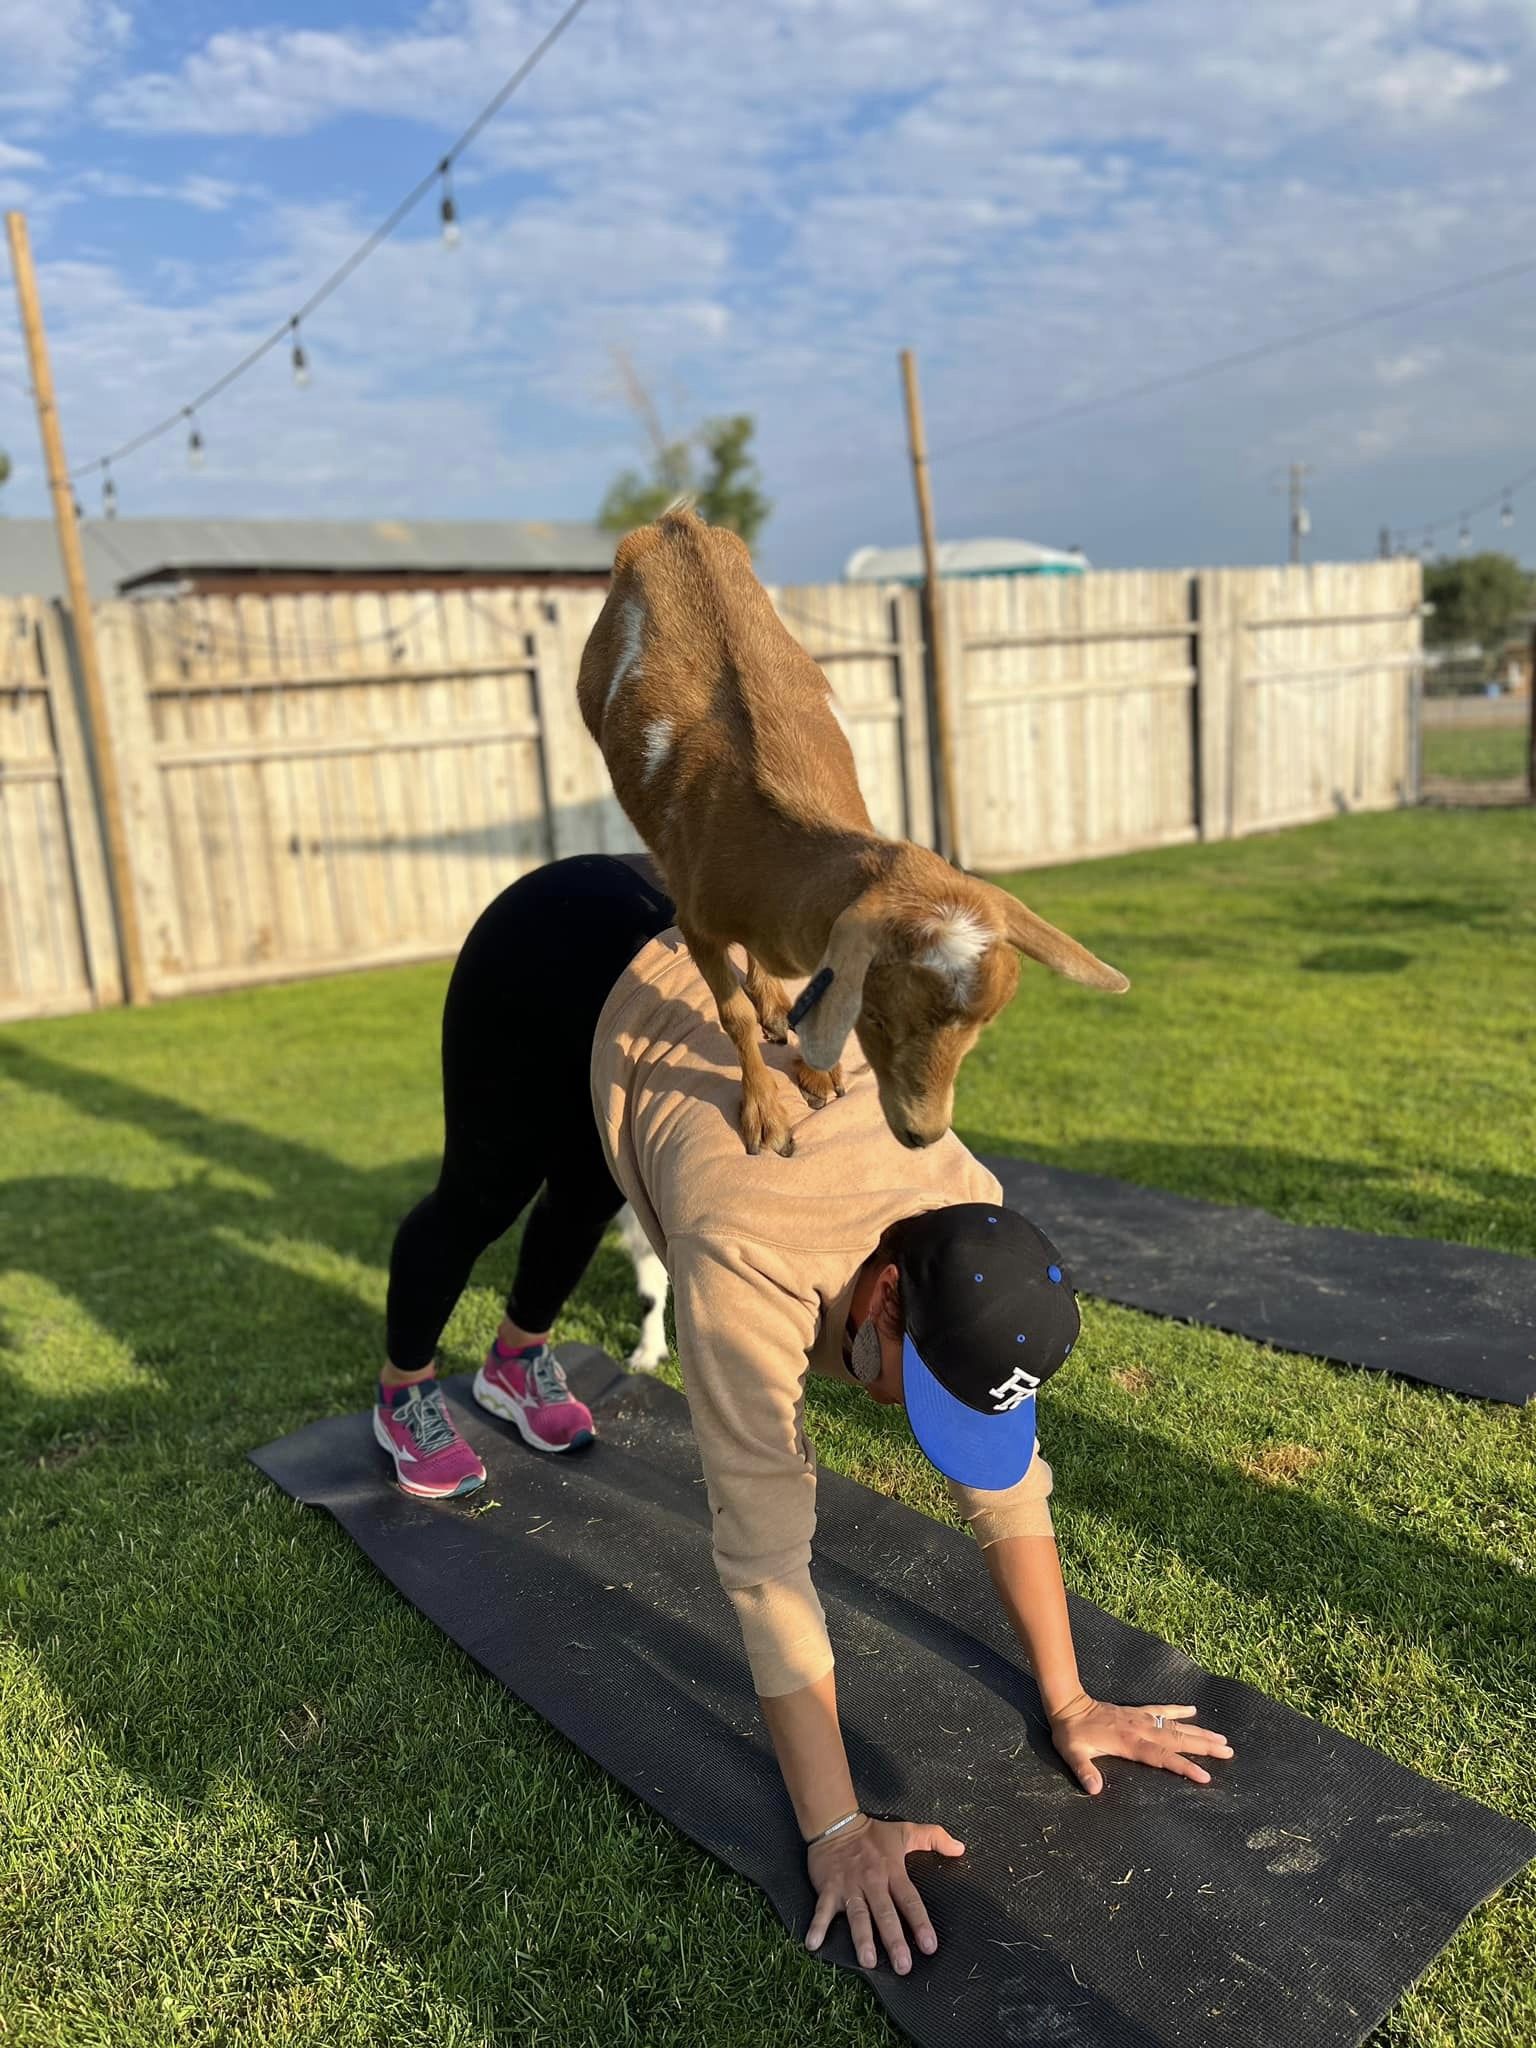 Cuddling baby goats and giving good doggos pats - welcome to goat yoga in  Boyanup | Countryman